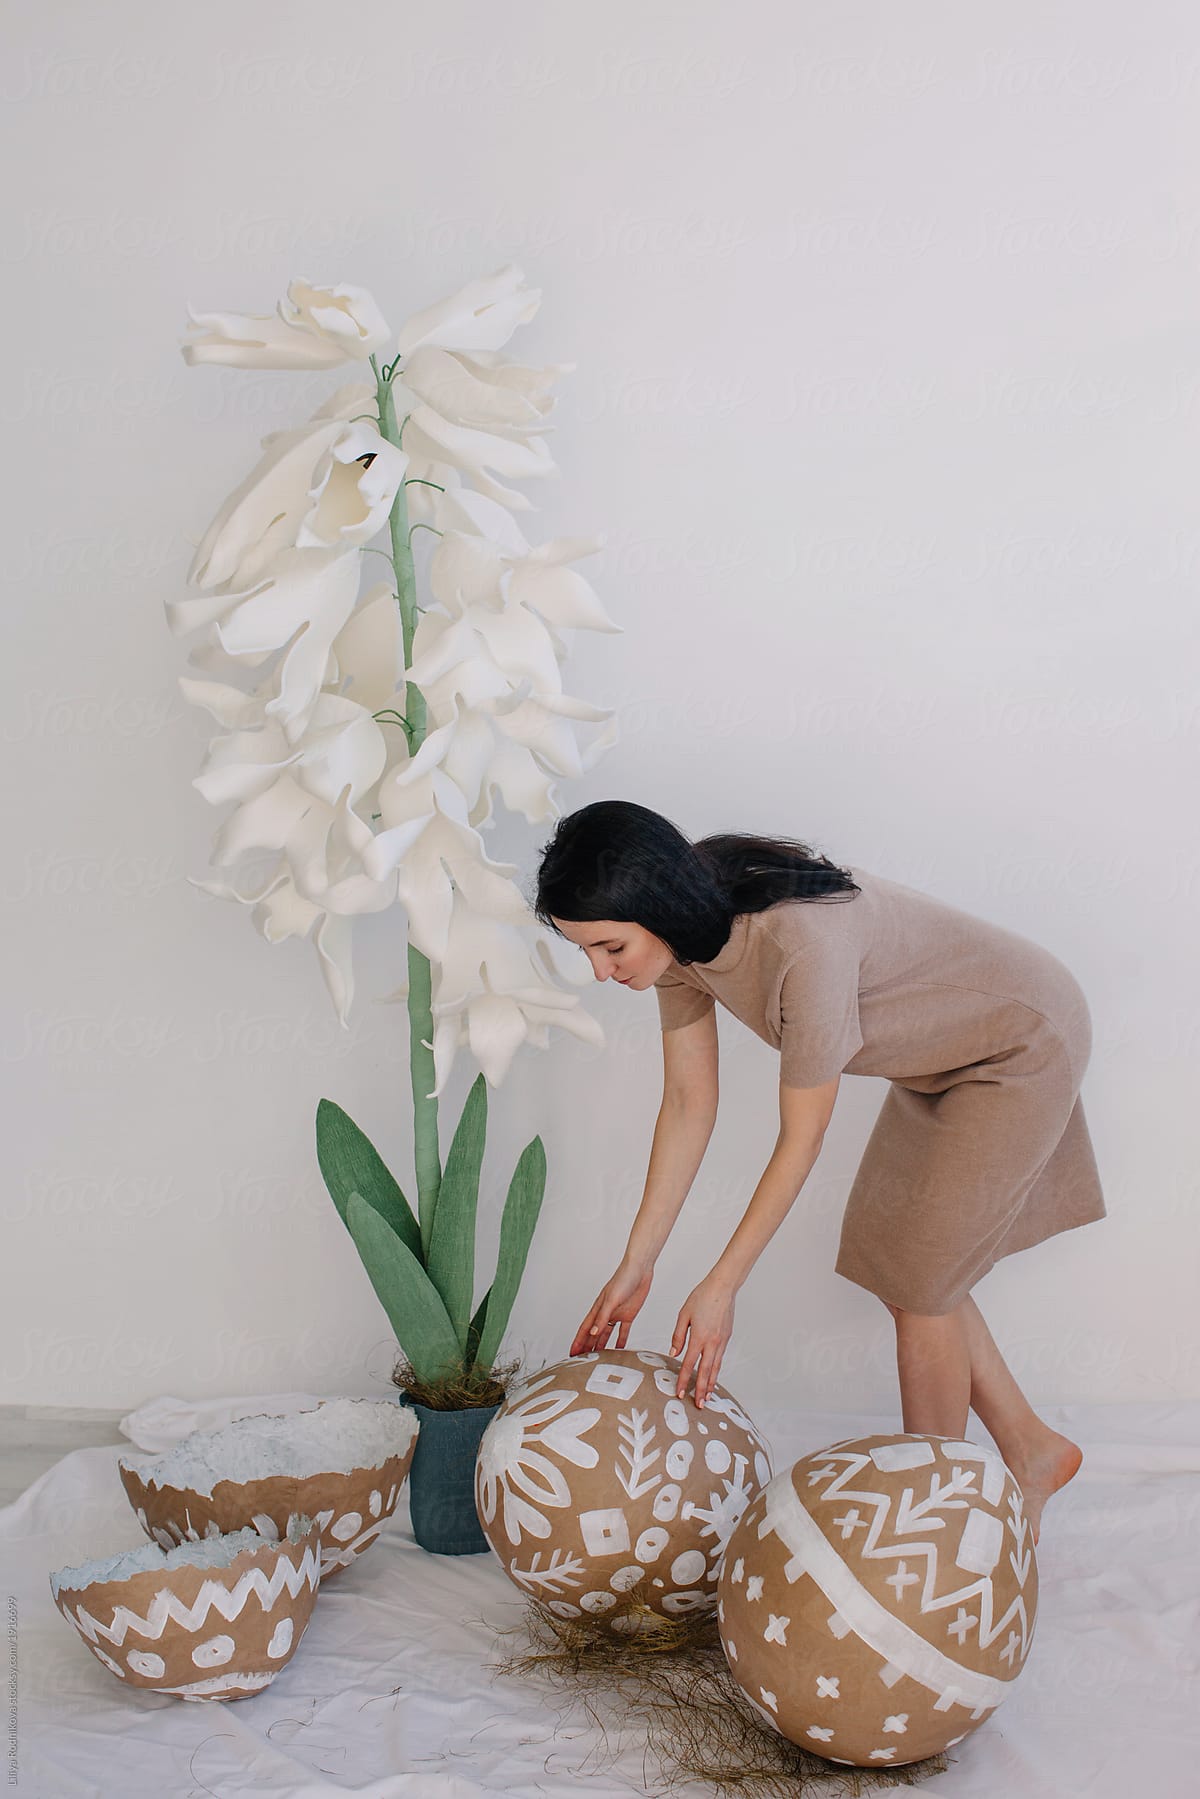 Lovely young woman arranging Easter decor with giant painted eggs and white hyacinth